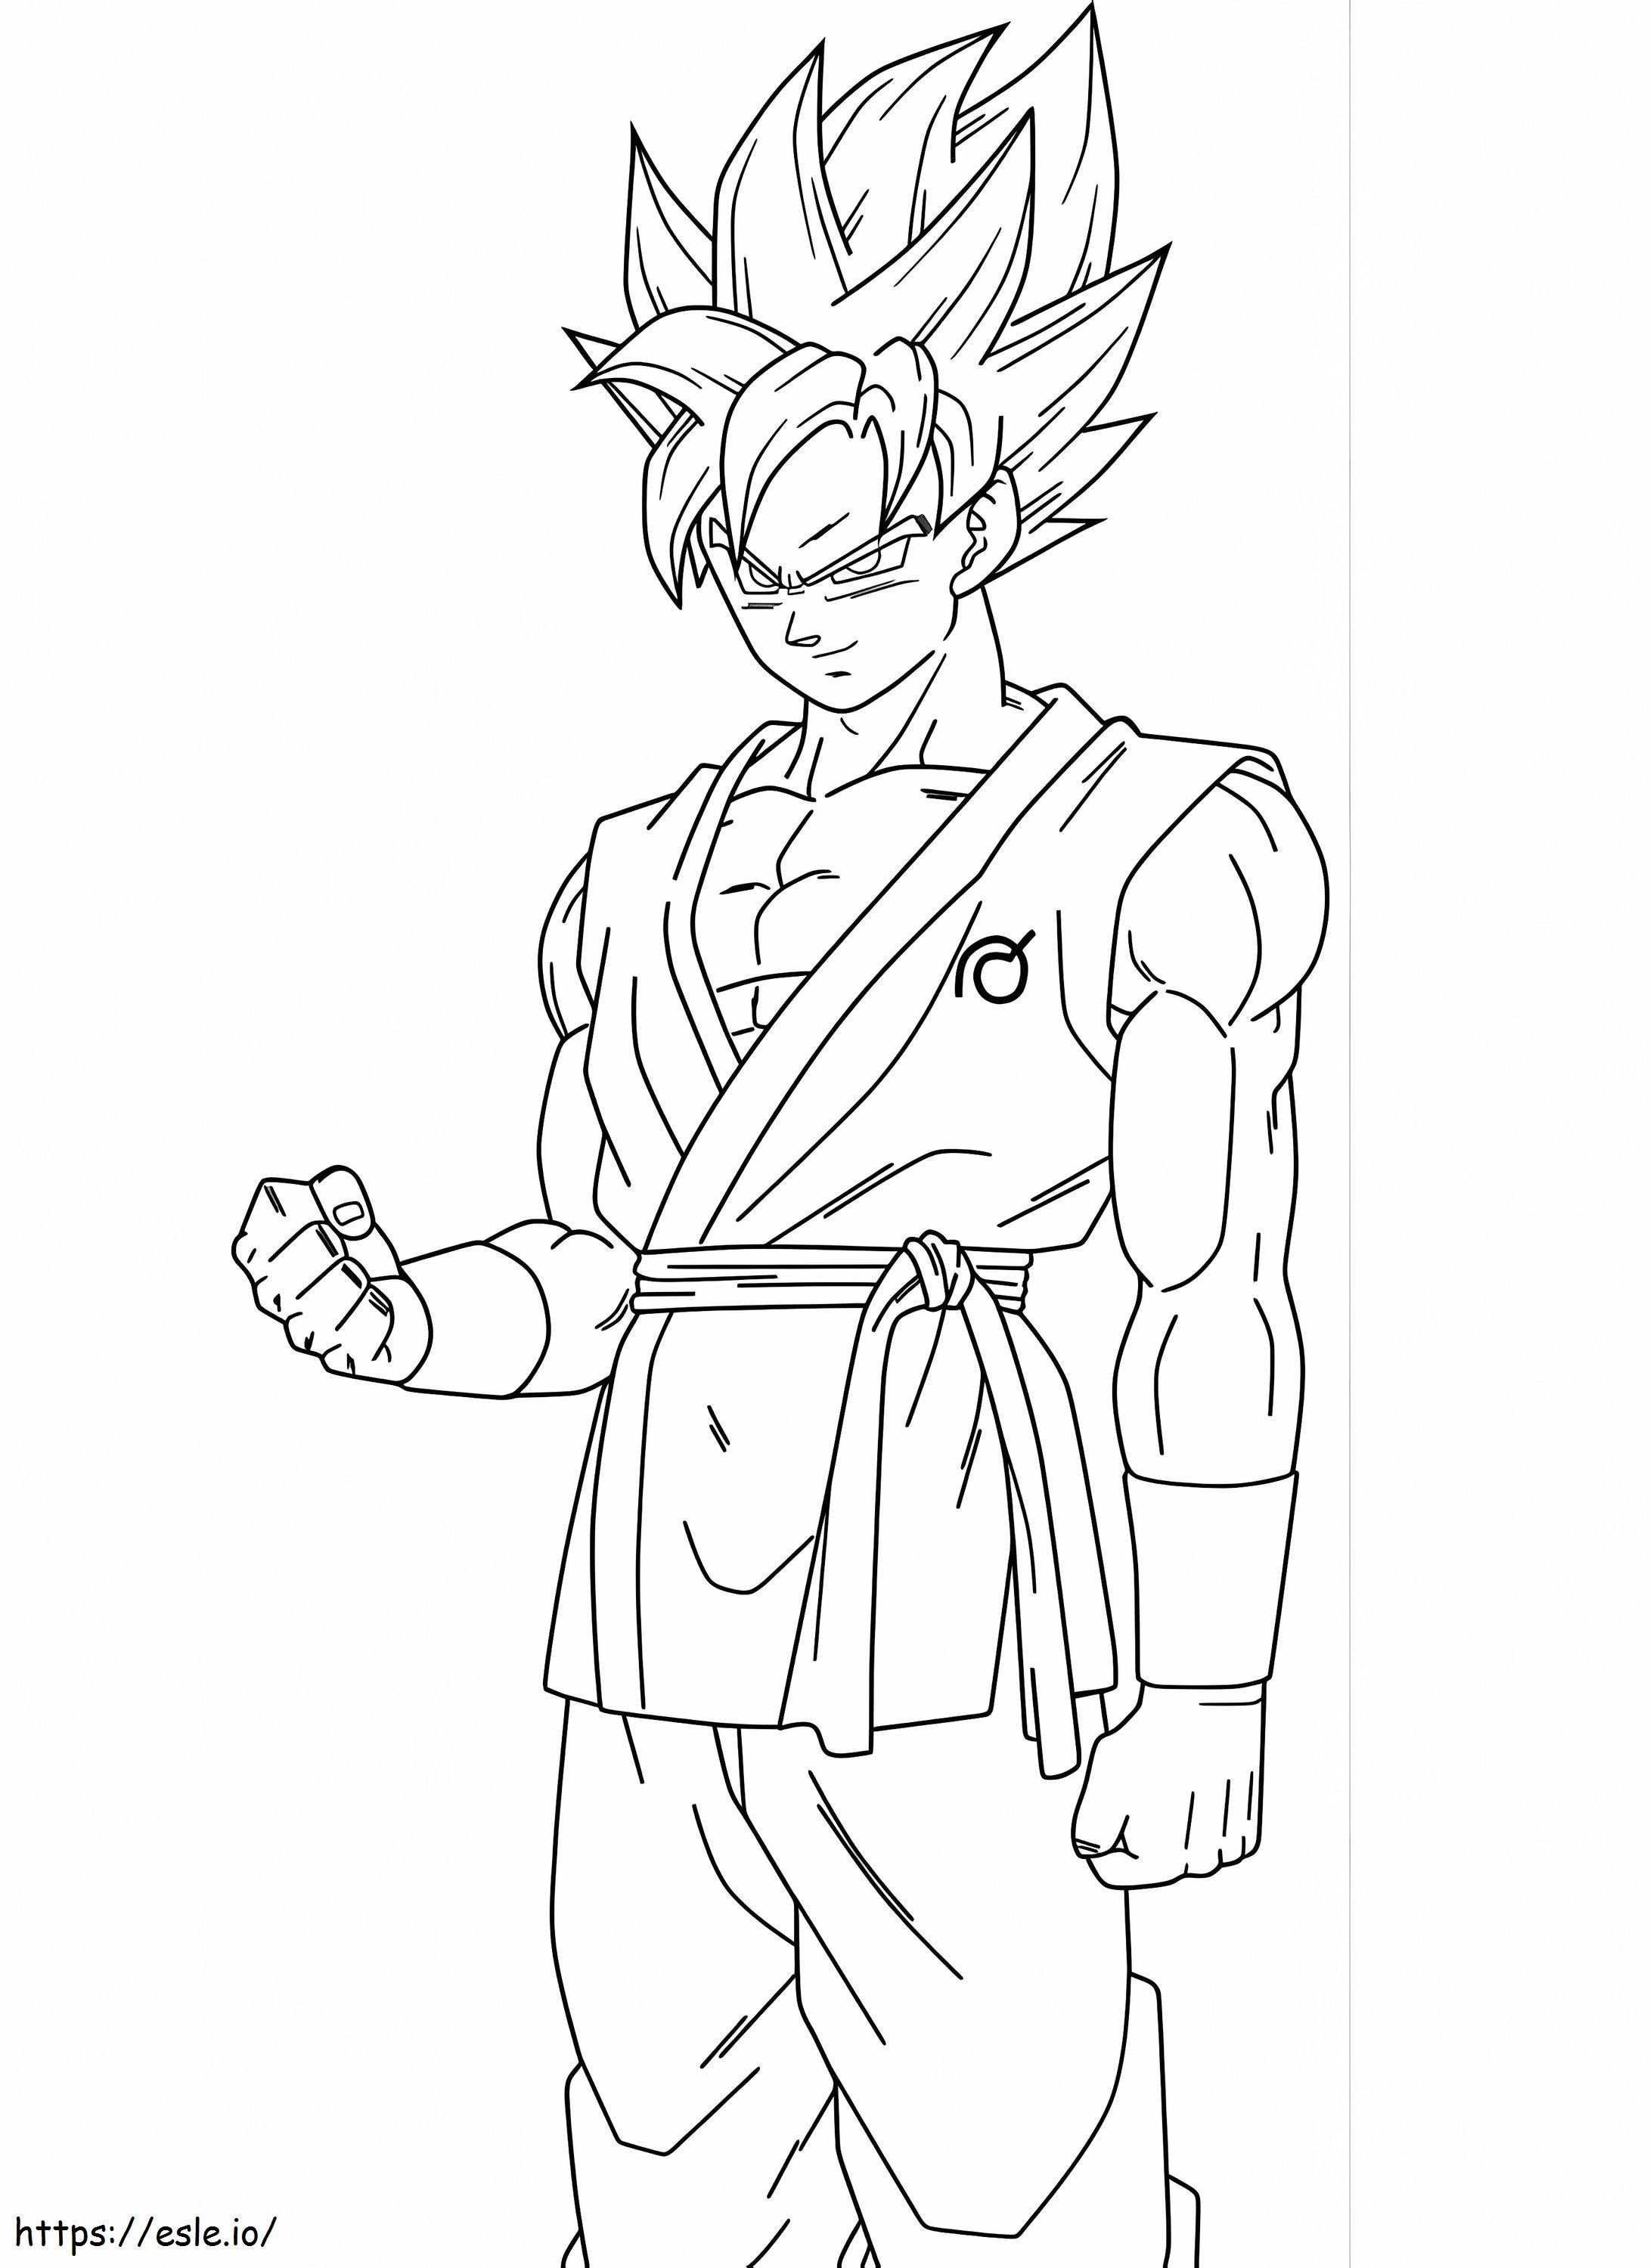 Cool Son Goku coloring page